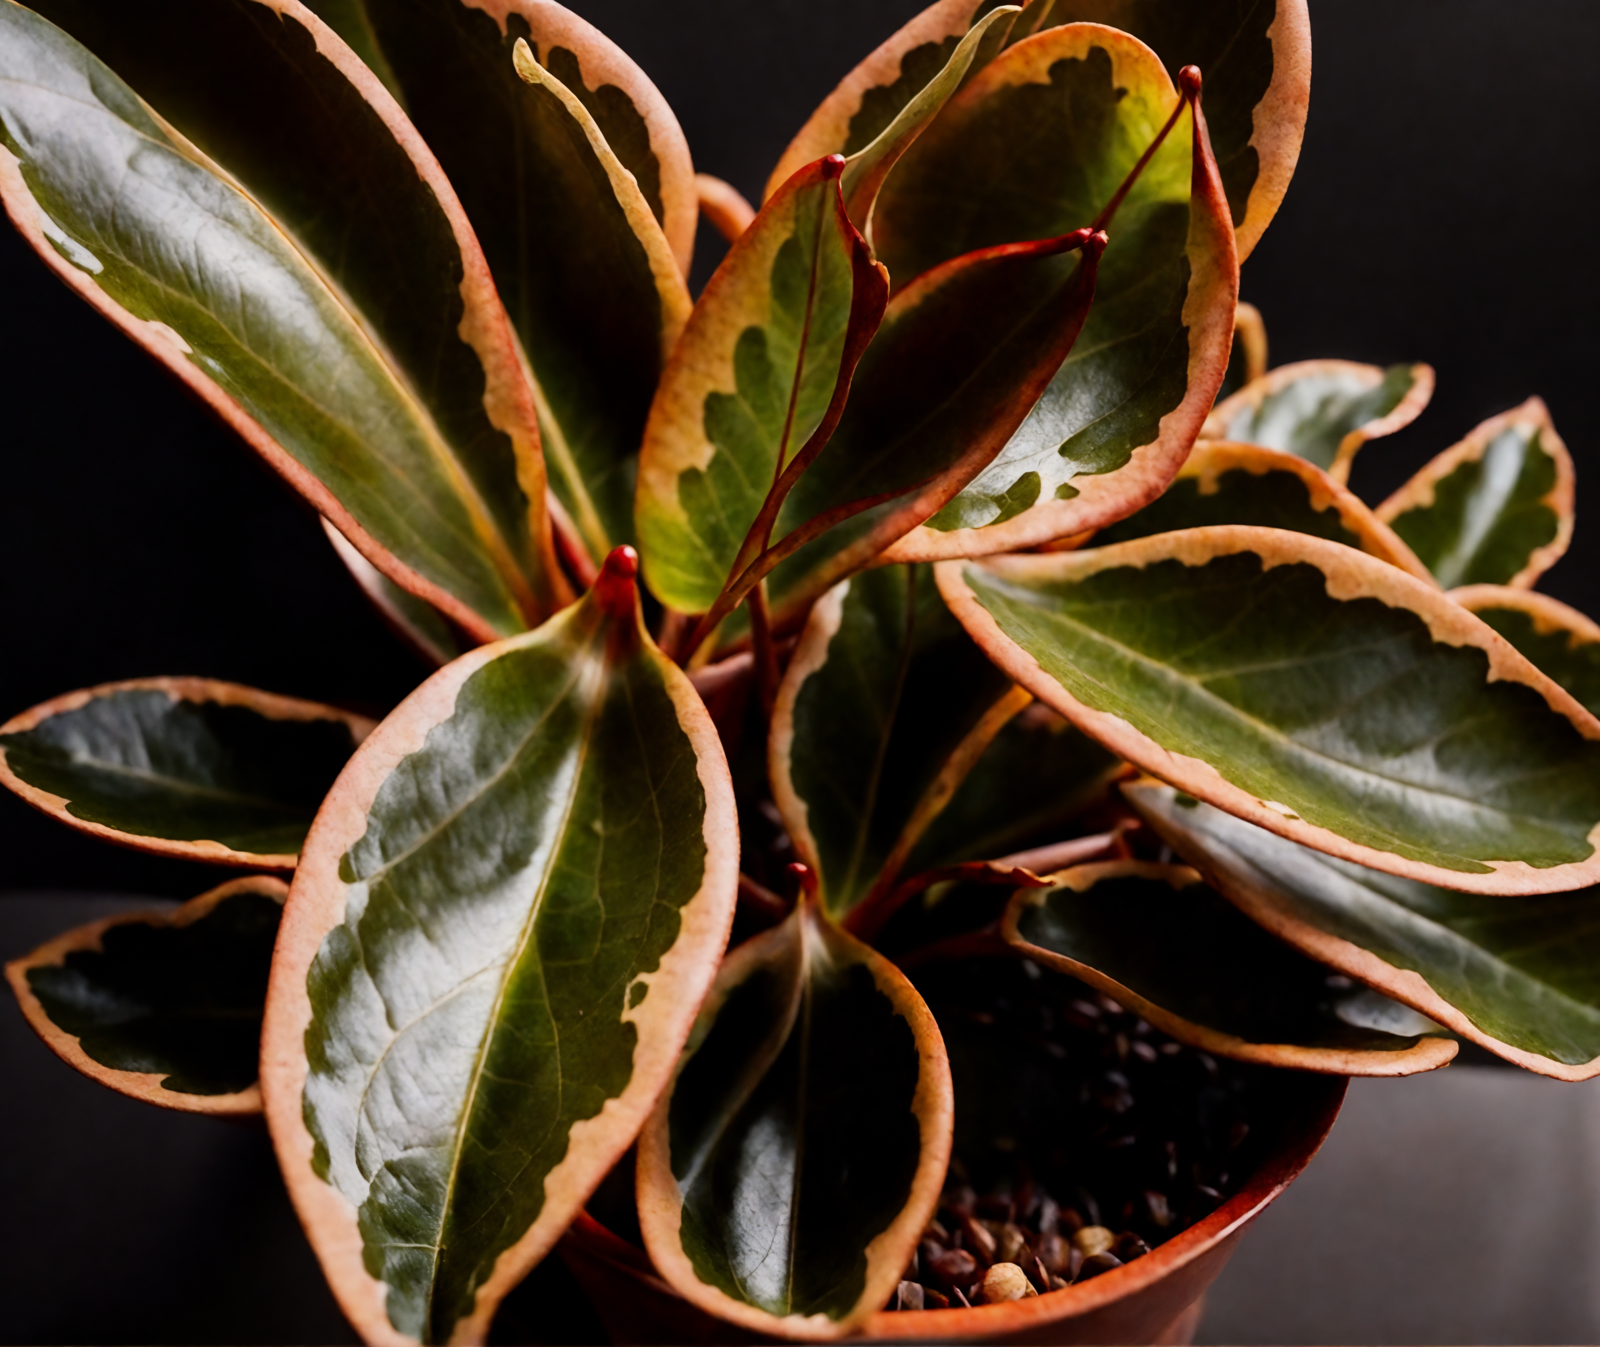 Peperomia clusiifolia with red leaves in a bowl planter, clear indoor lighting, against a dark background.